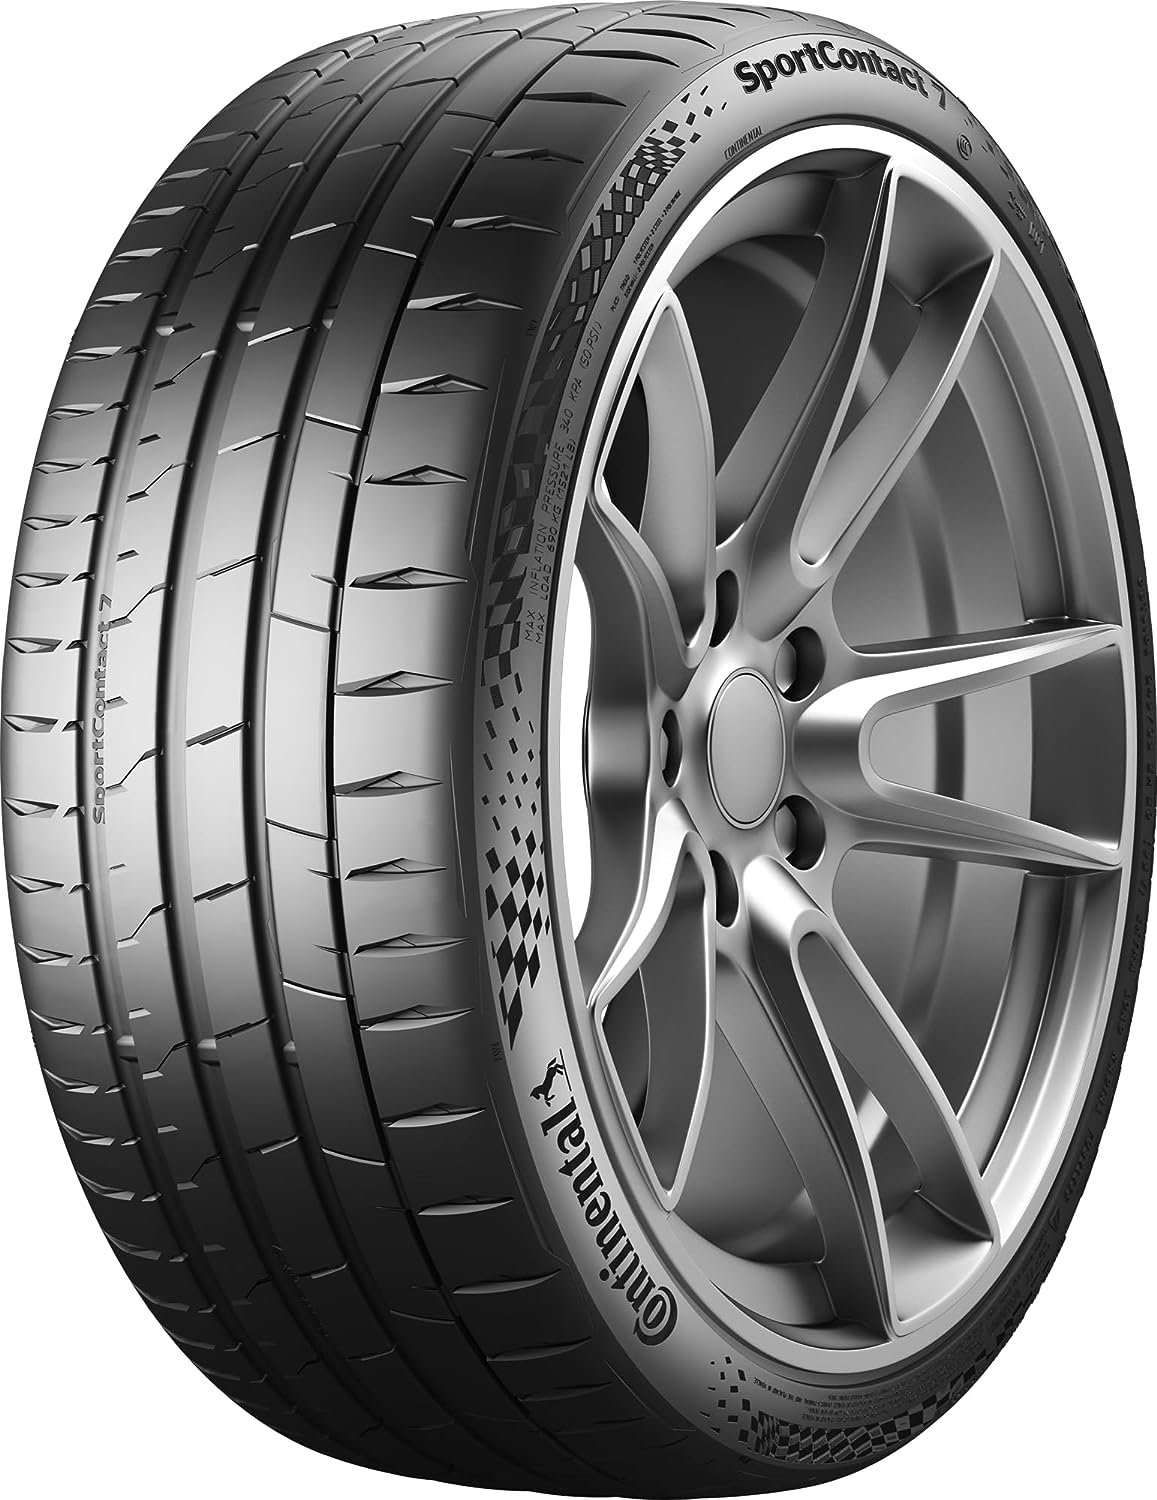 CONTINENTAL SPORTCONTACT 7 XL - 255/35R19 (96Y) - D/A/73dB - Summer Tyres